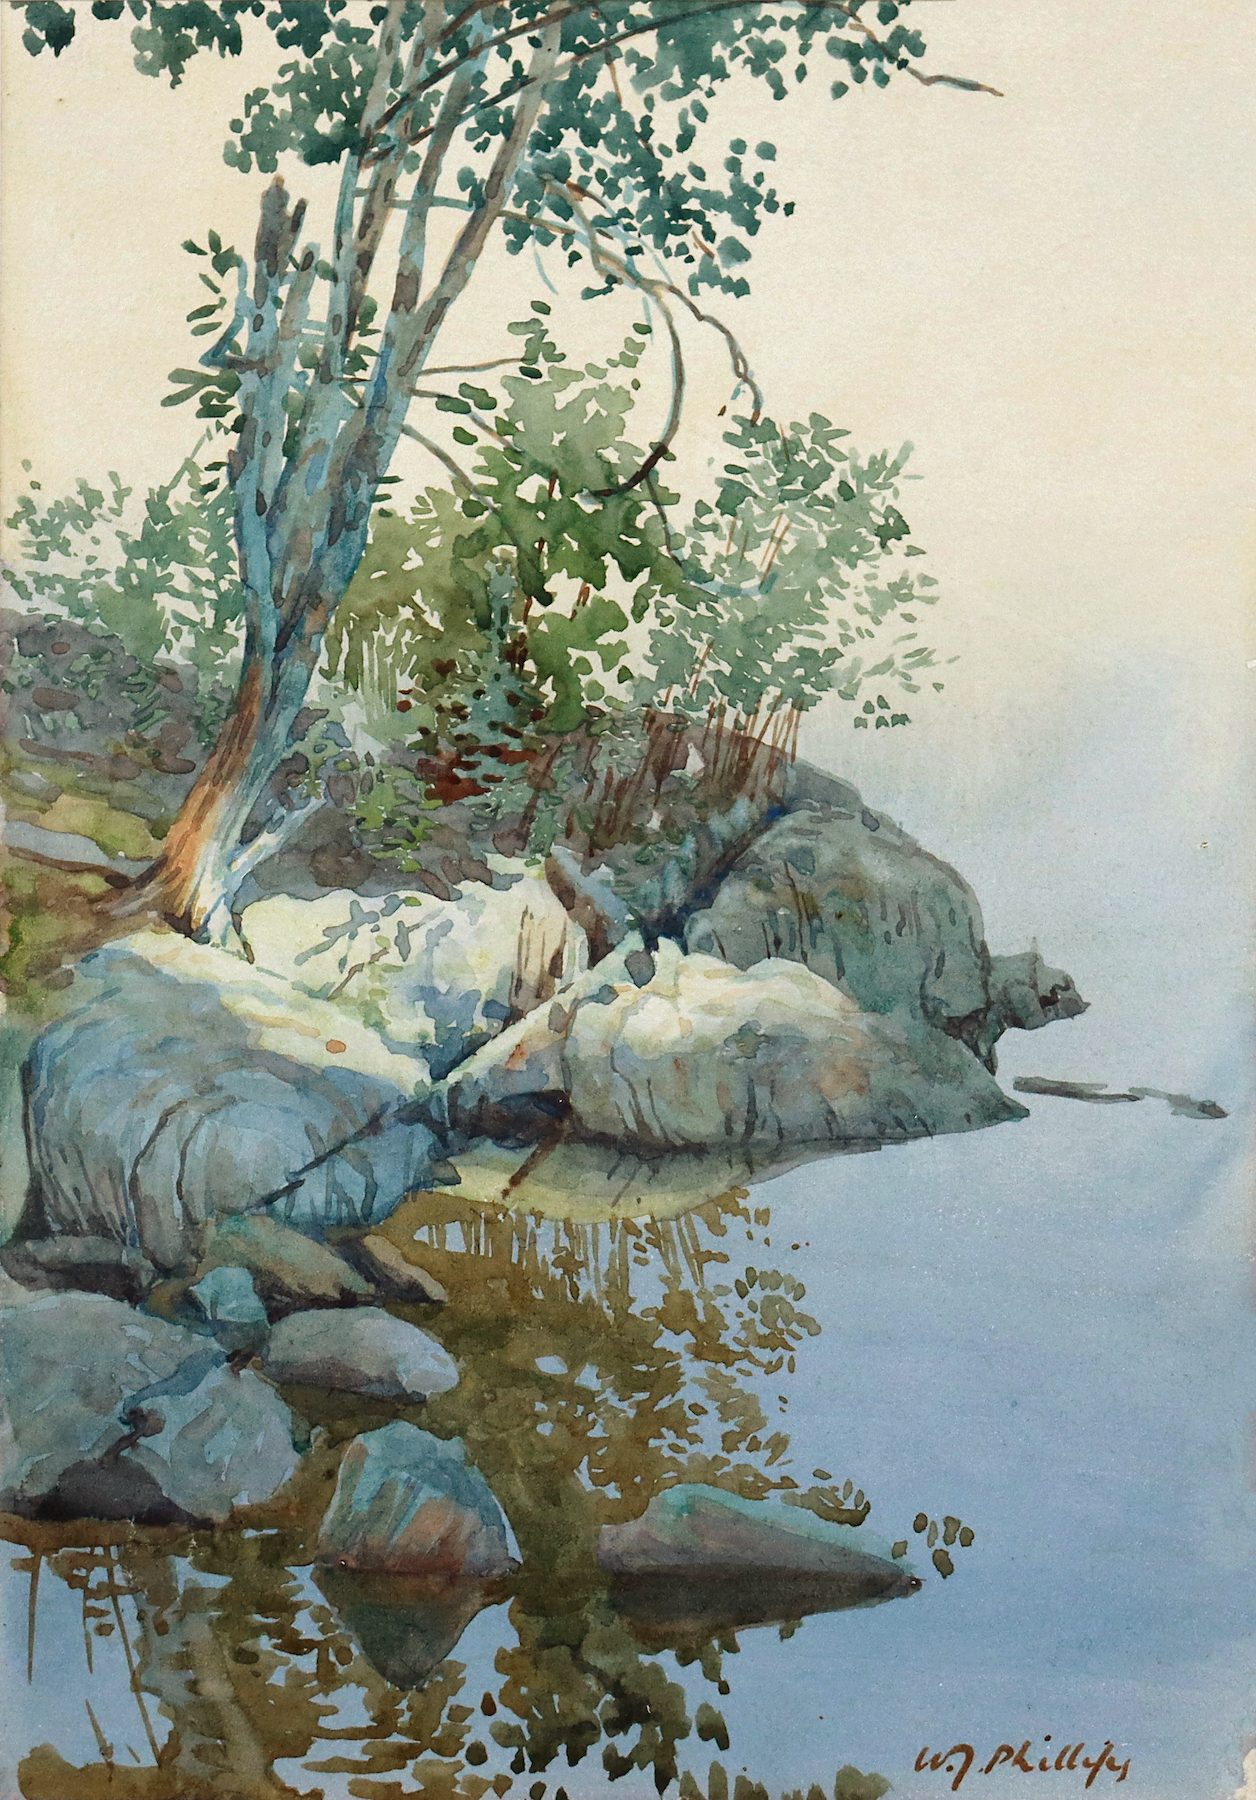 Phillips-Reflections, Lake of the Woods, c.1920-web